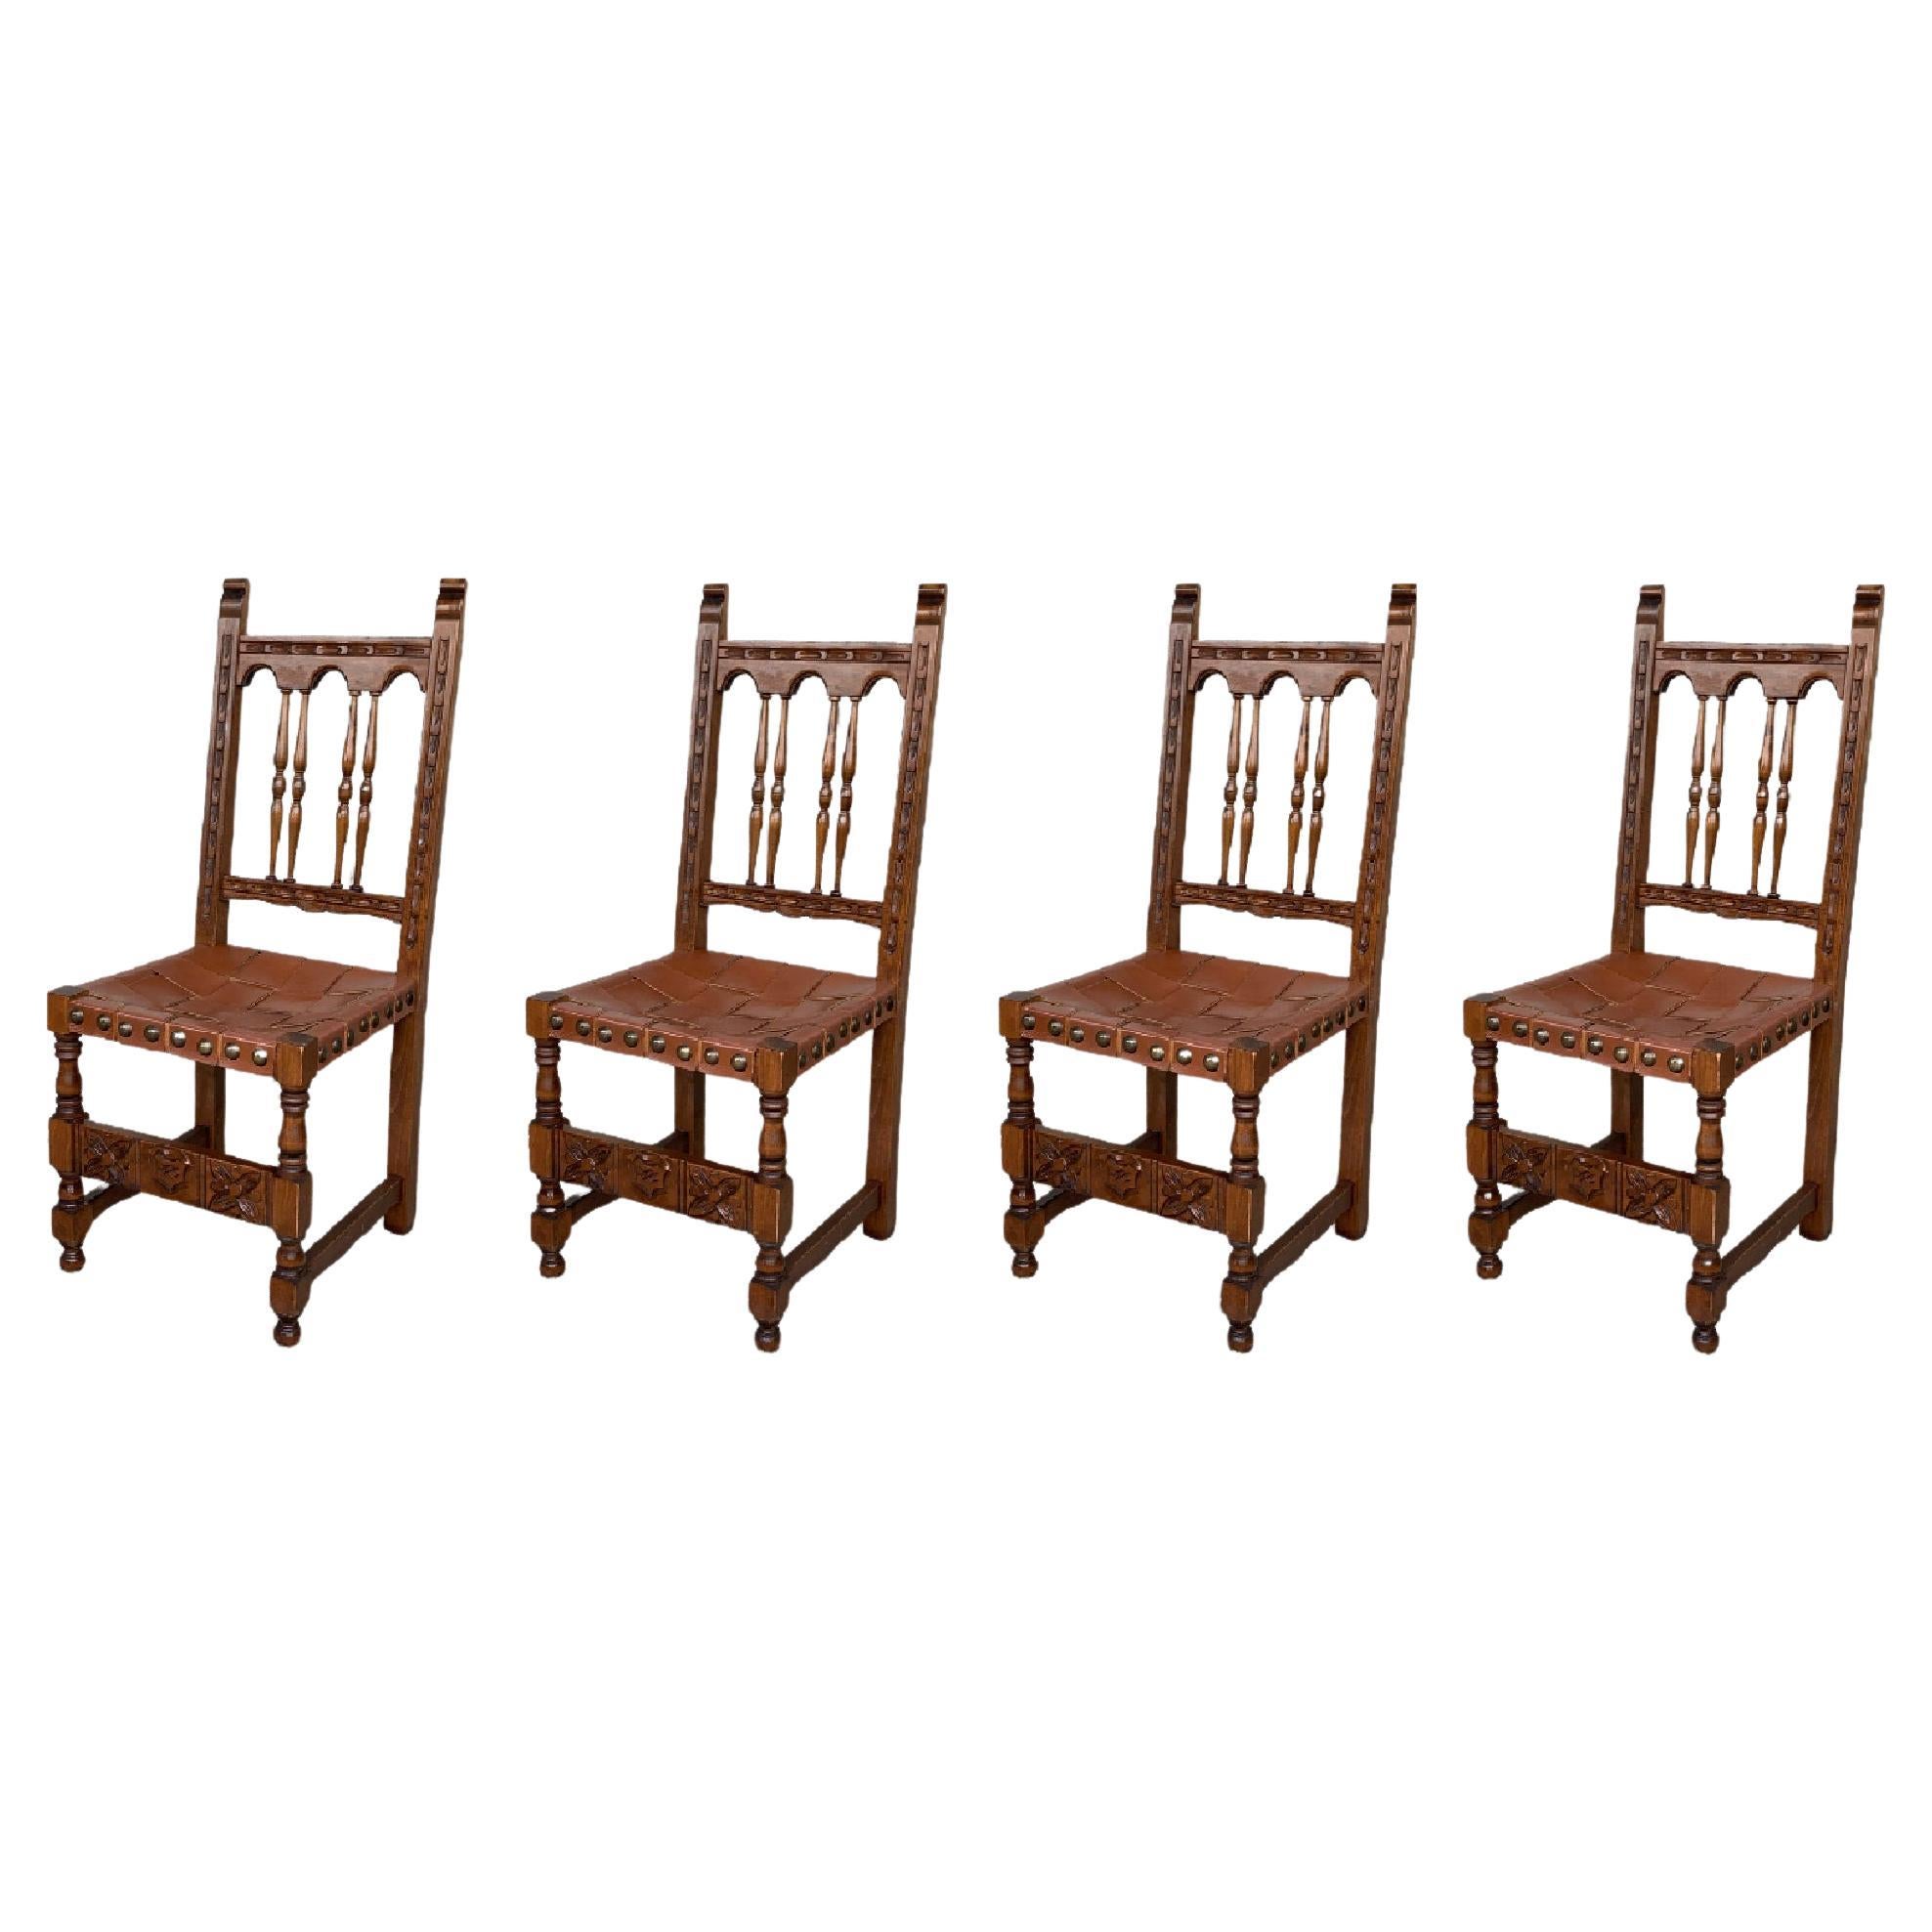 19th Set of Four Spanish Carved Chairs with Leather Seat and Back